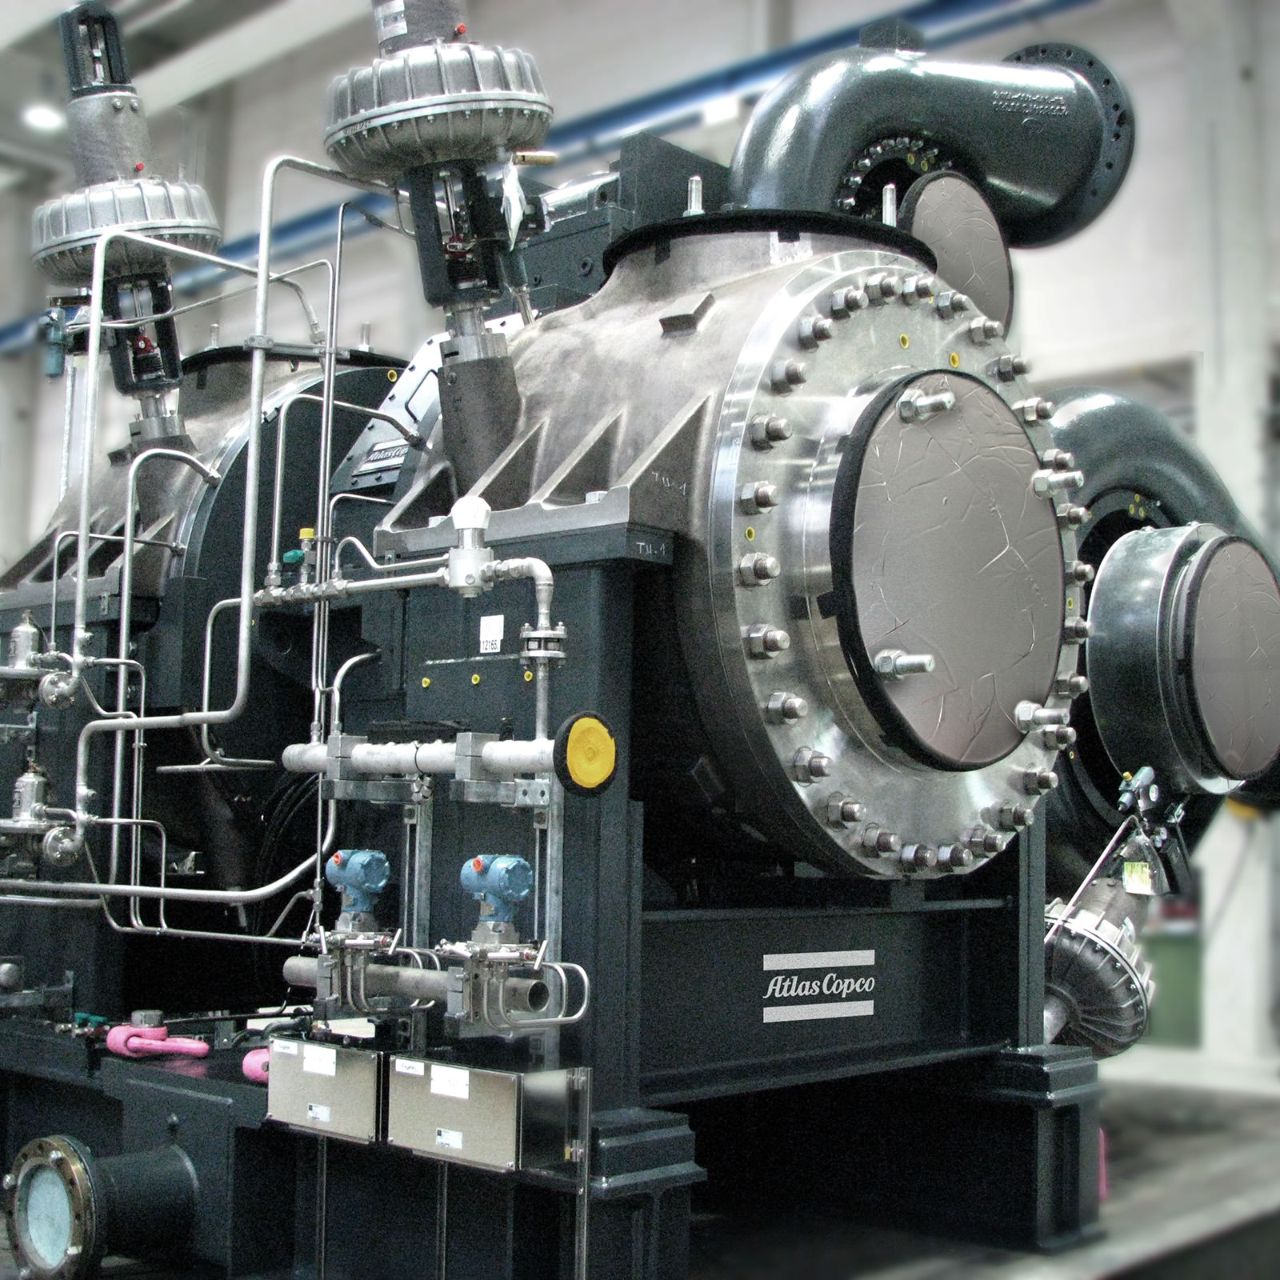 Integrally geared compressor with radial inflow turbine (Compander)